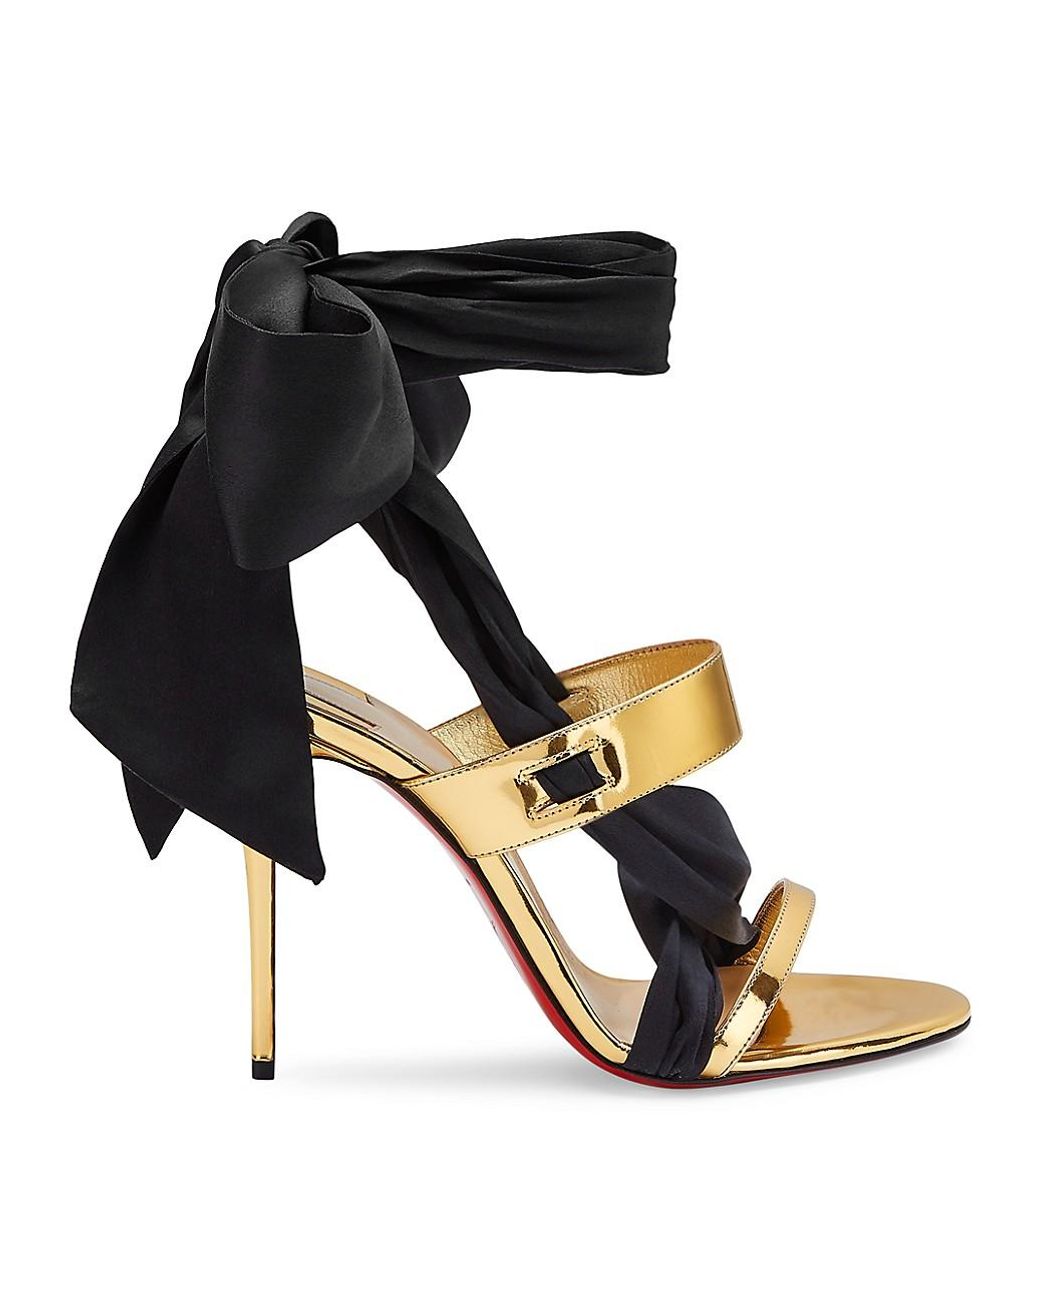 Christian Louboutin Foulard Cheville Satin Ankle-tie Sandals in Black | Lyst